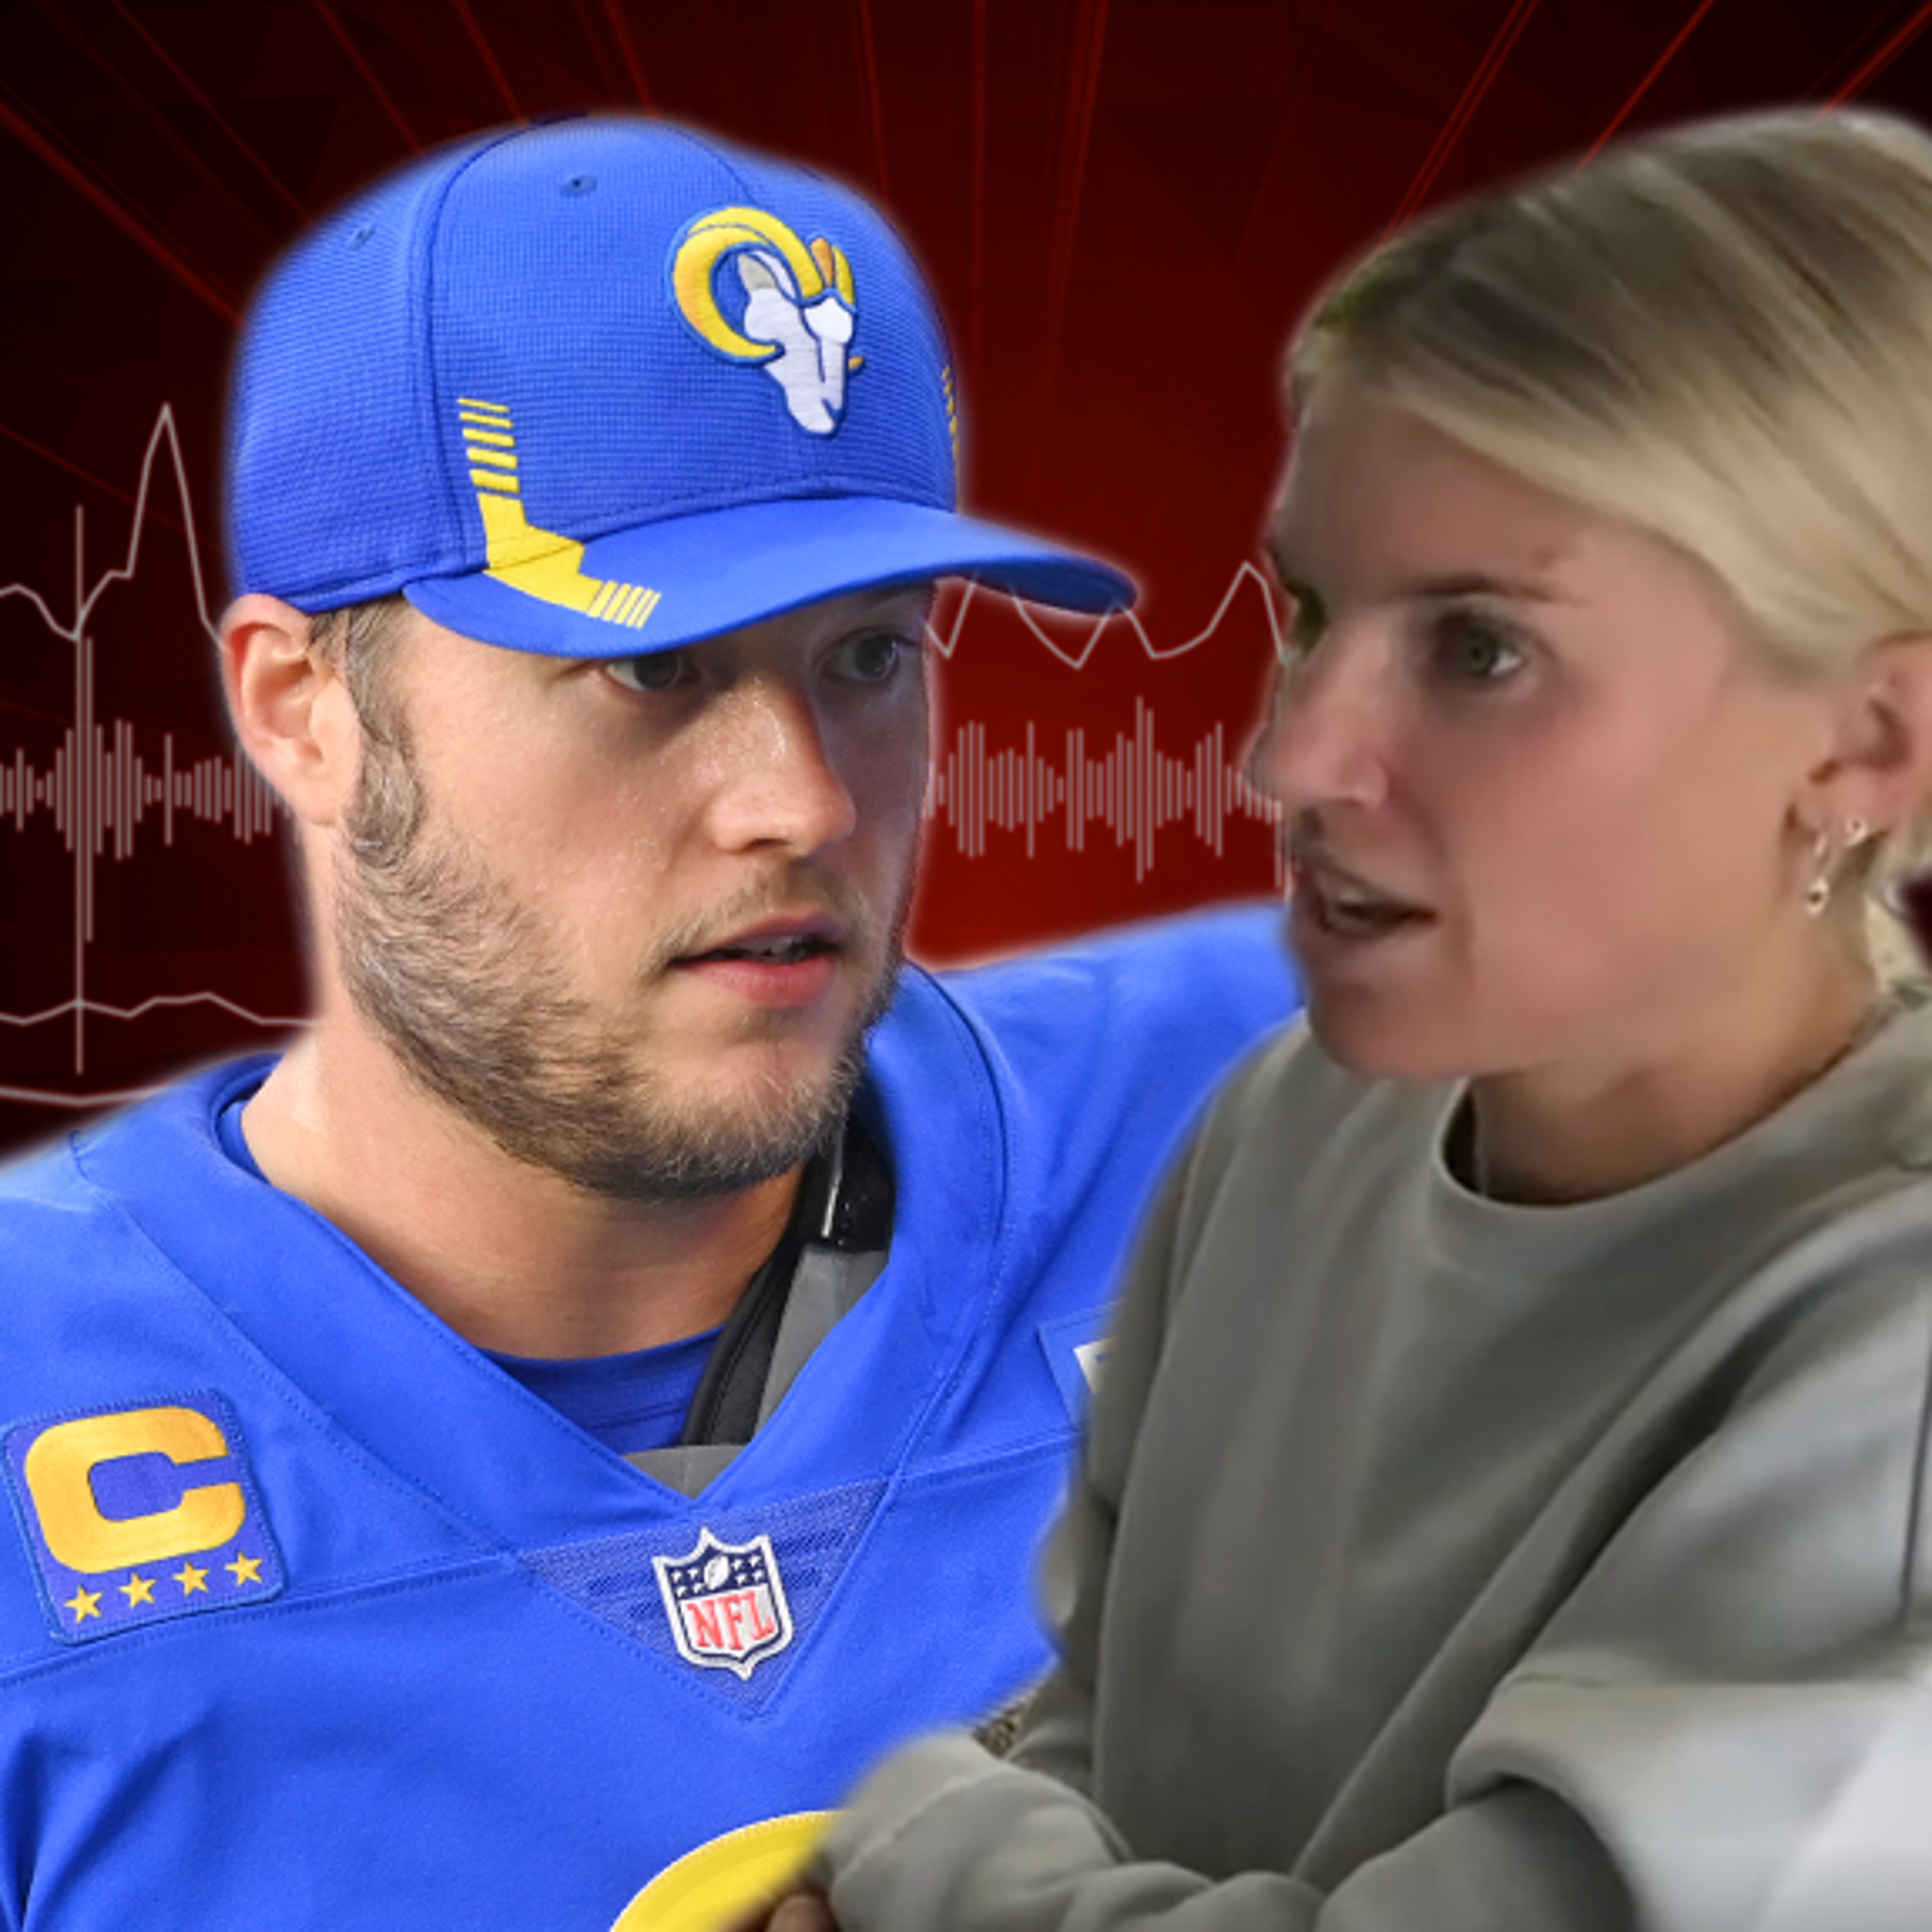 Matthew Stafford Texted Rams Photog, Apologized For Reaction To Bad Fall